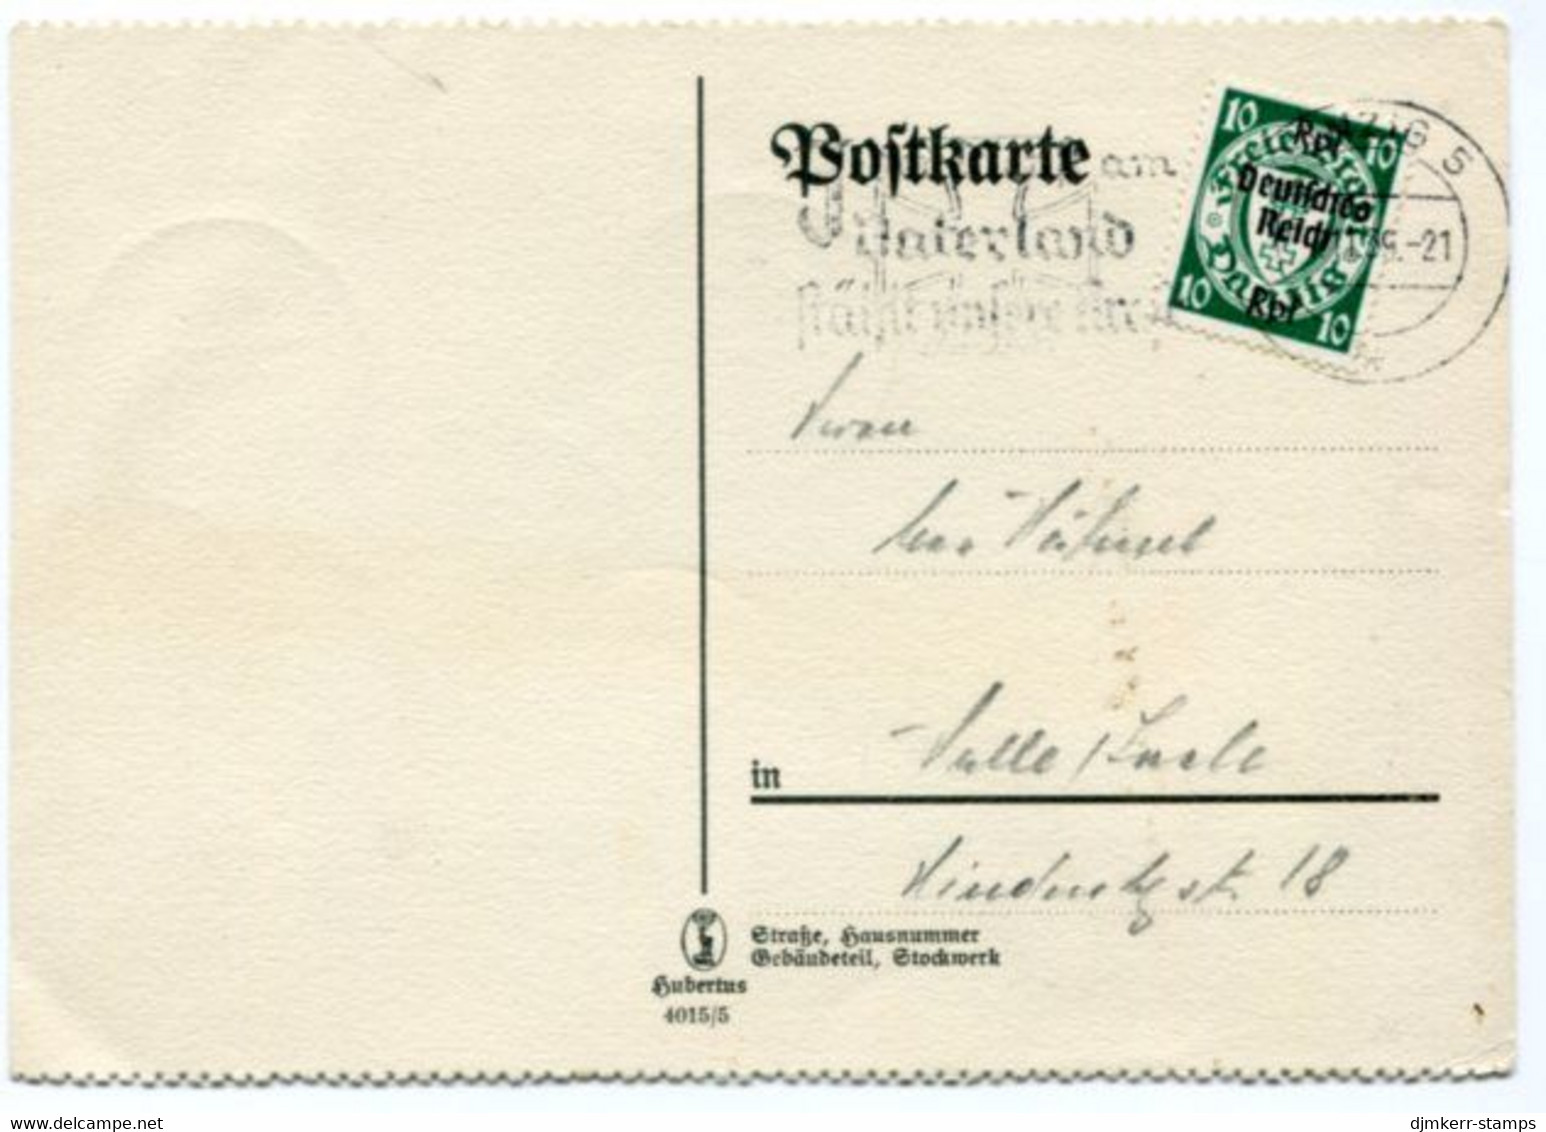 DANZIG 1939 Overprinted Issue ("Abshiedsausgabe") 10 Rpf. On Oostcard.  Michel DR 720, Scarce As A Single Franking. - Briefe U. Dokumente